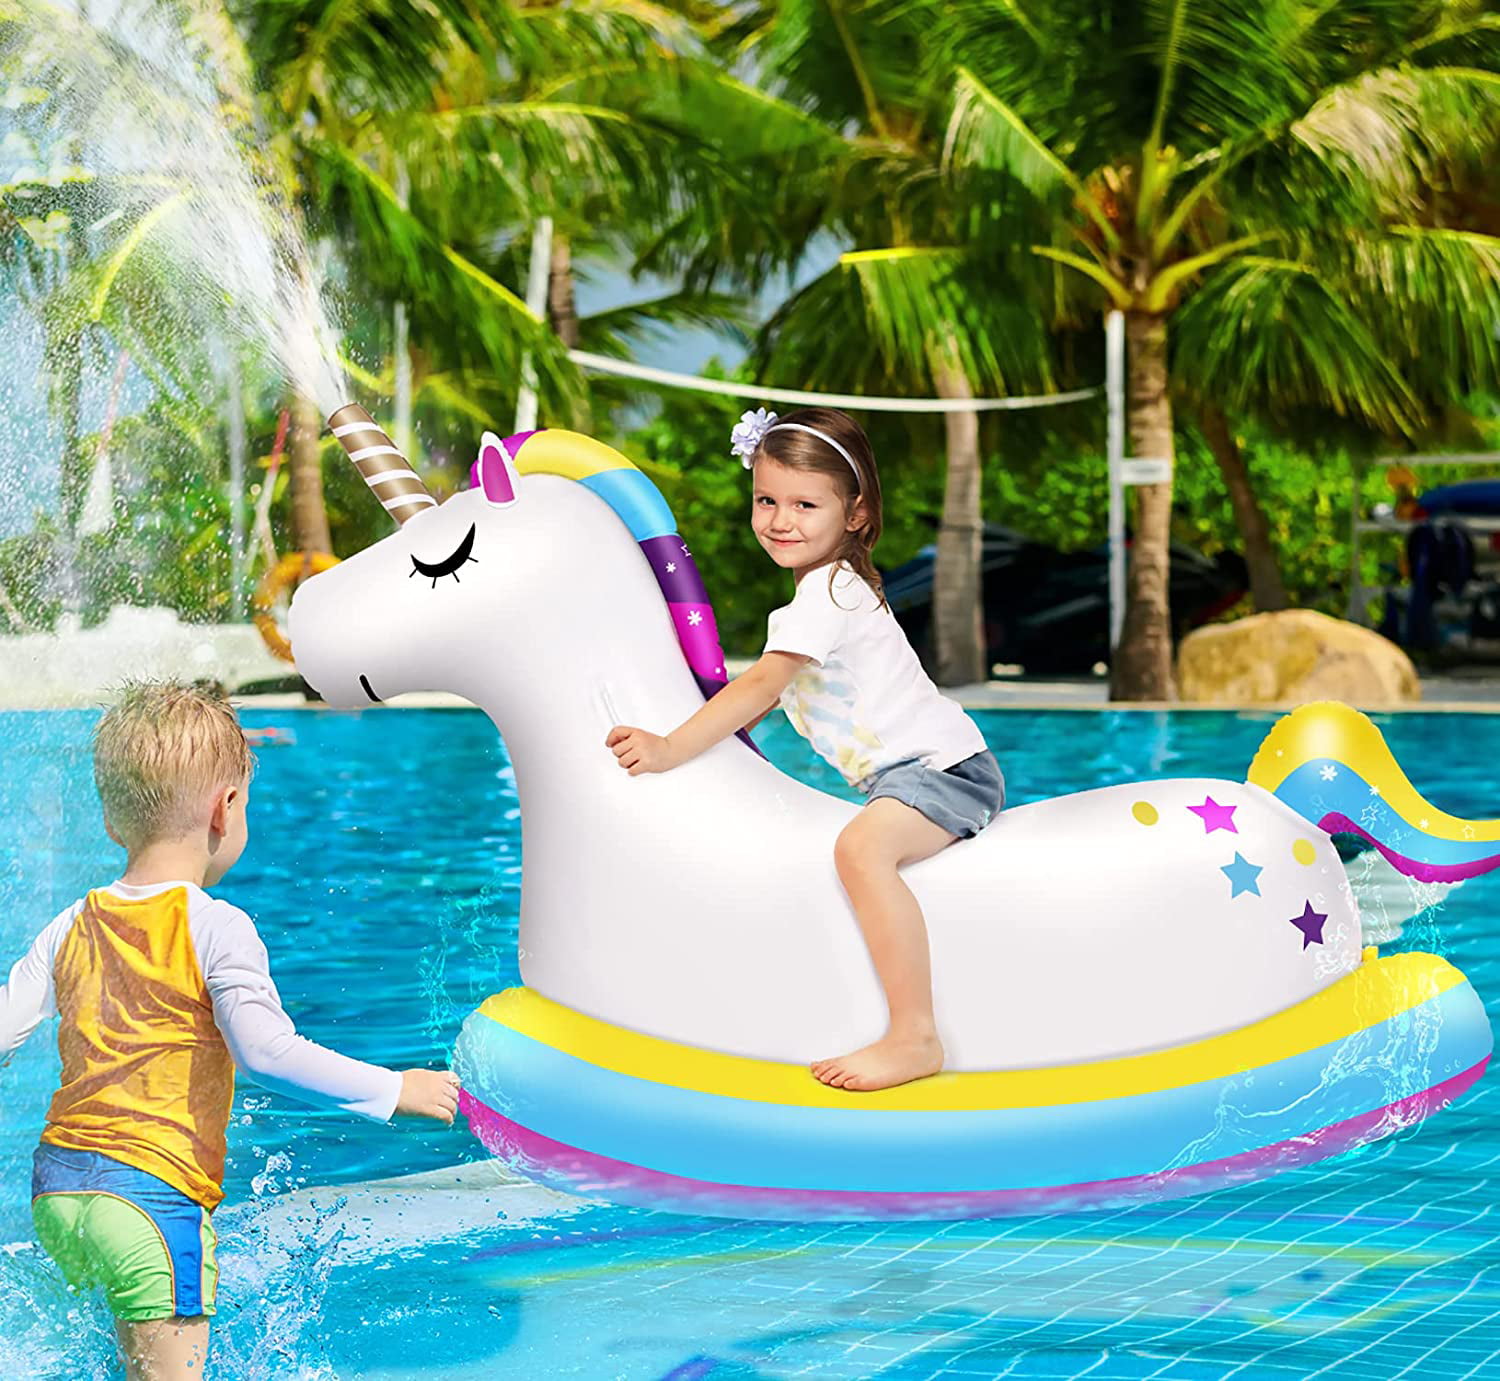 Jasonwell Giant Inflatable Unicorn Pool Float Party Inflatable Floaties Lounger Water Air Swimming Pool Toys for Kids & Adults with Rapid Valves